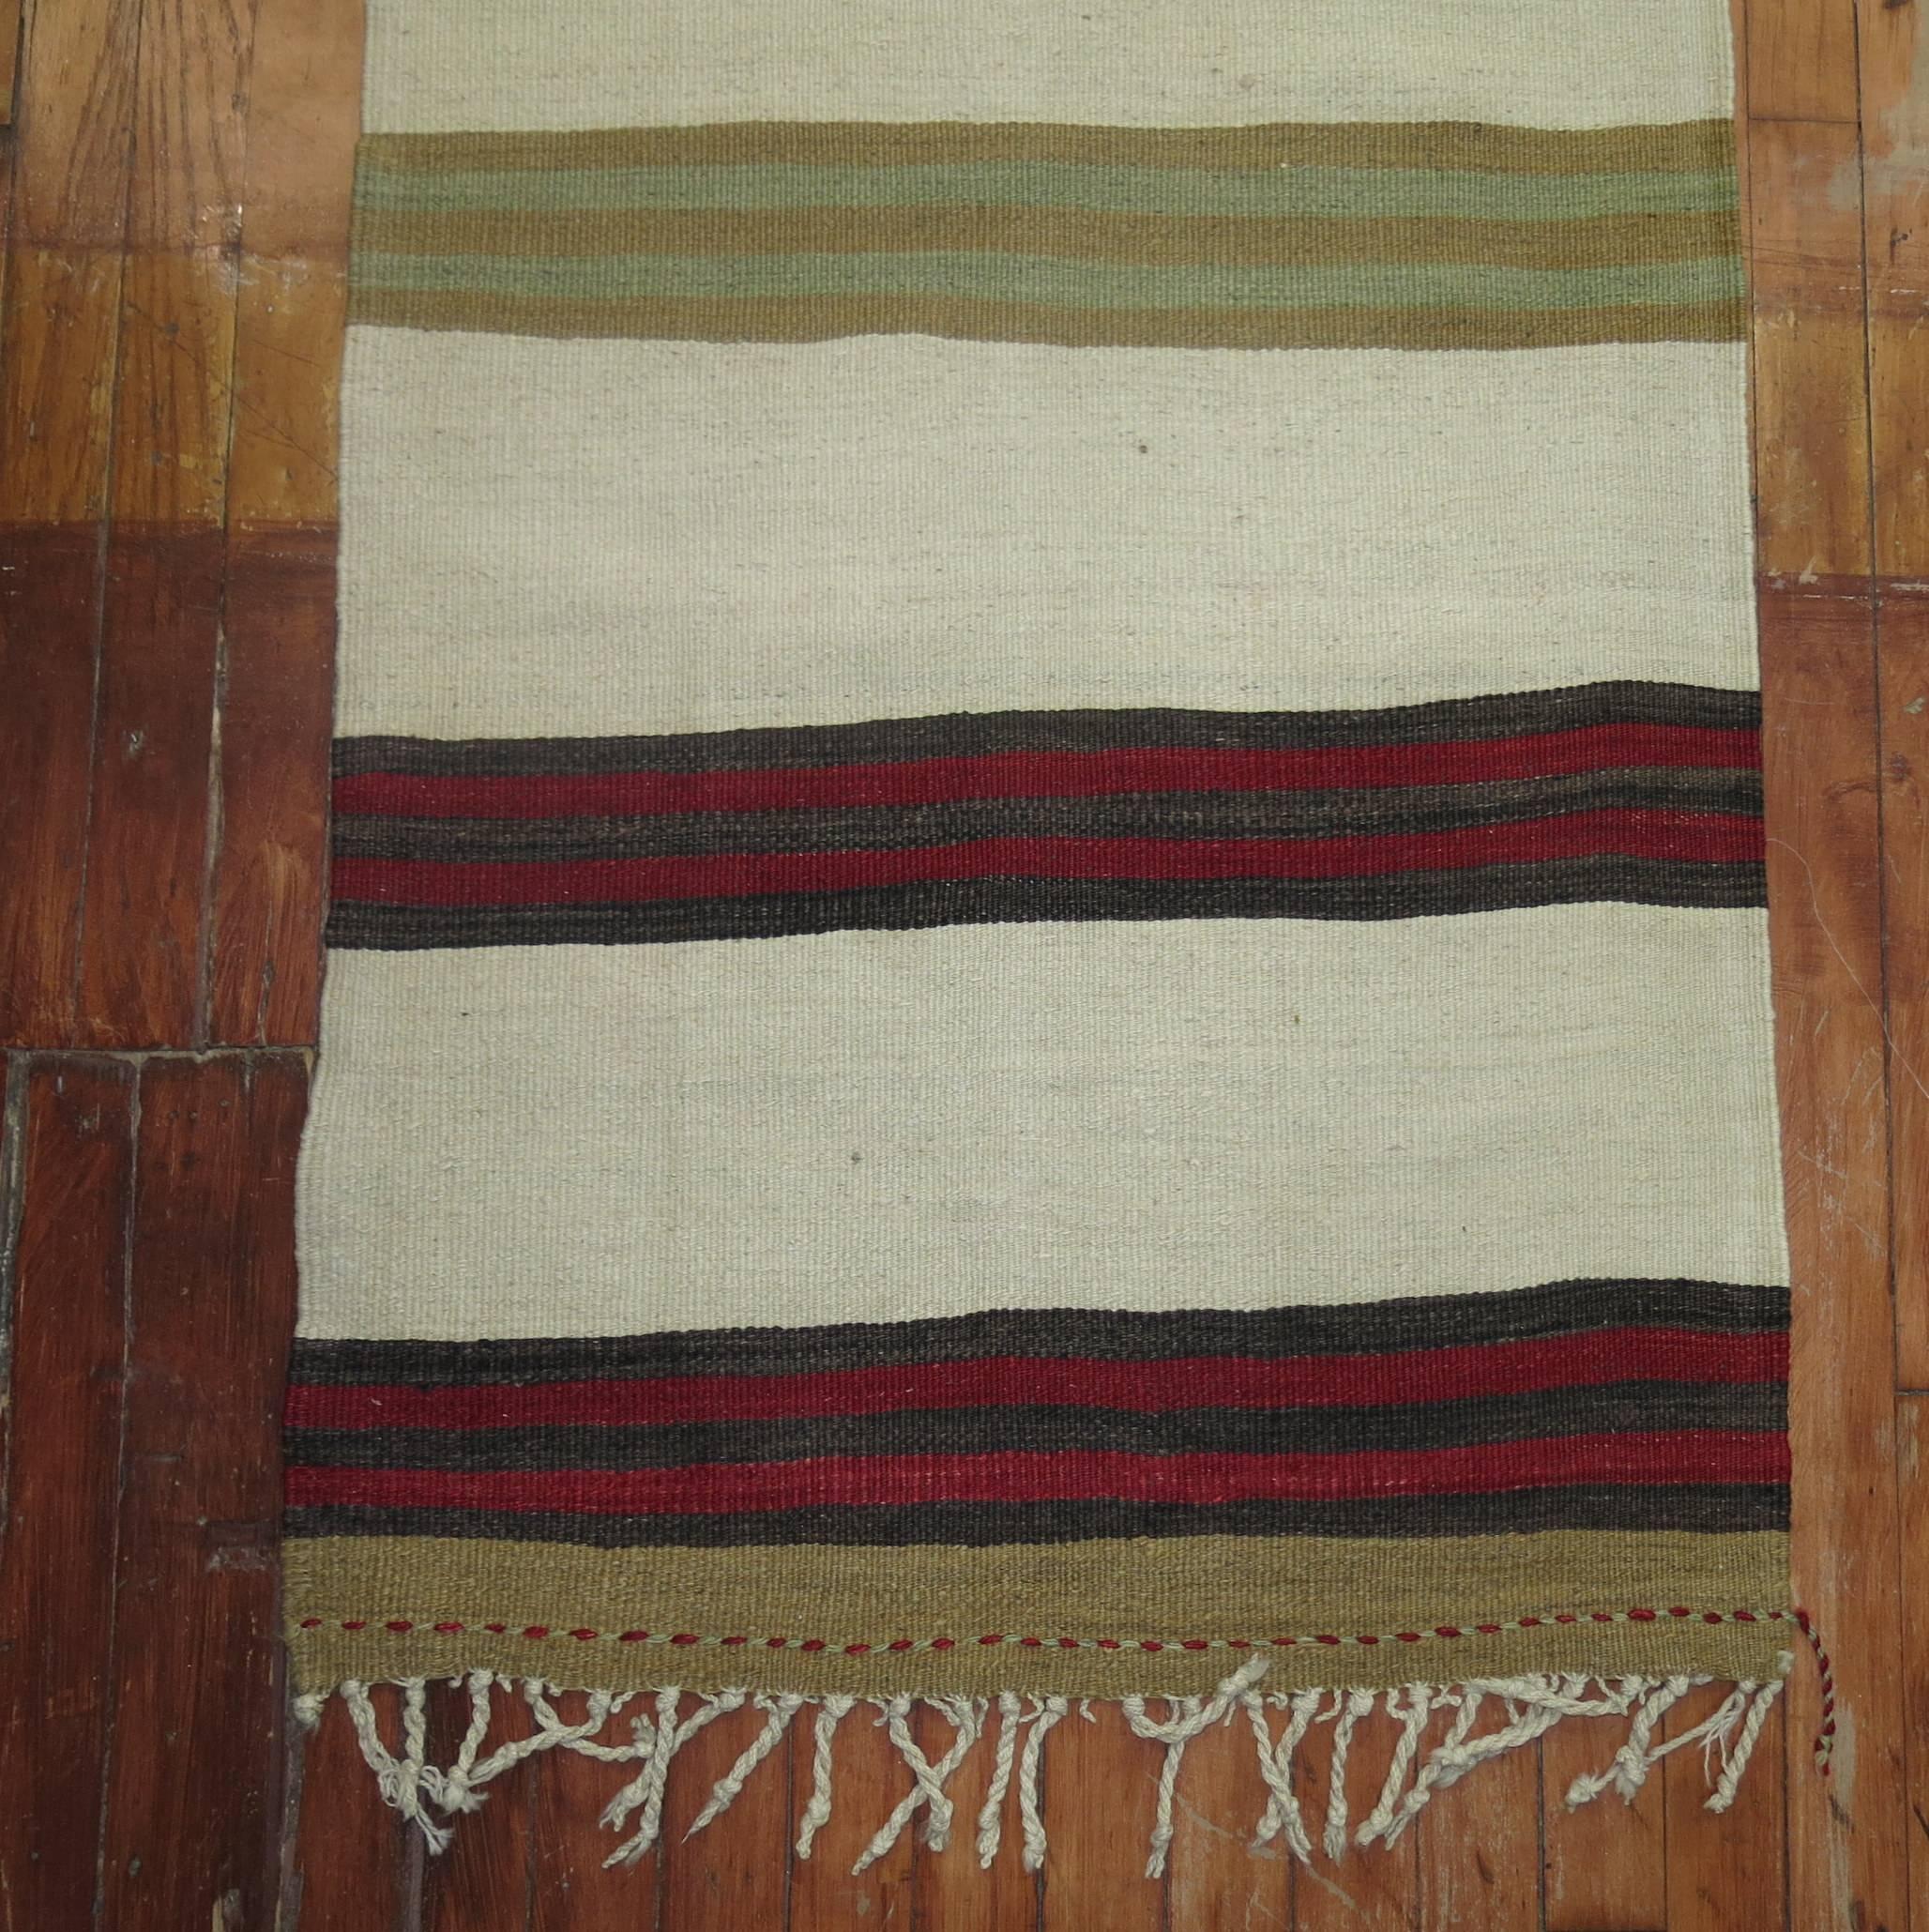 A mid-20th century narrow and long Turkish Kilim runner featuring an ivory colored ground,

circa mid-20th century, measures: 2'2